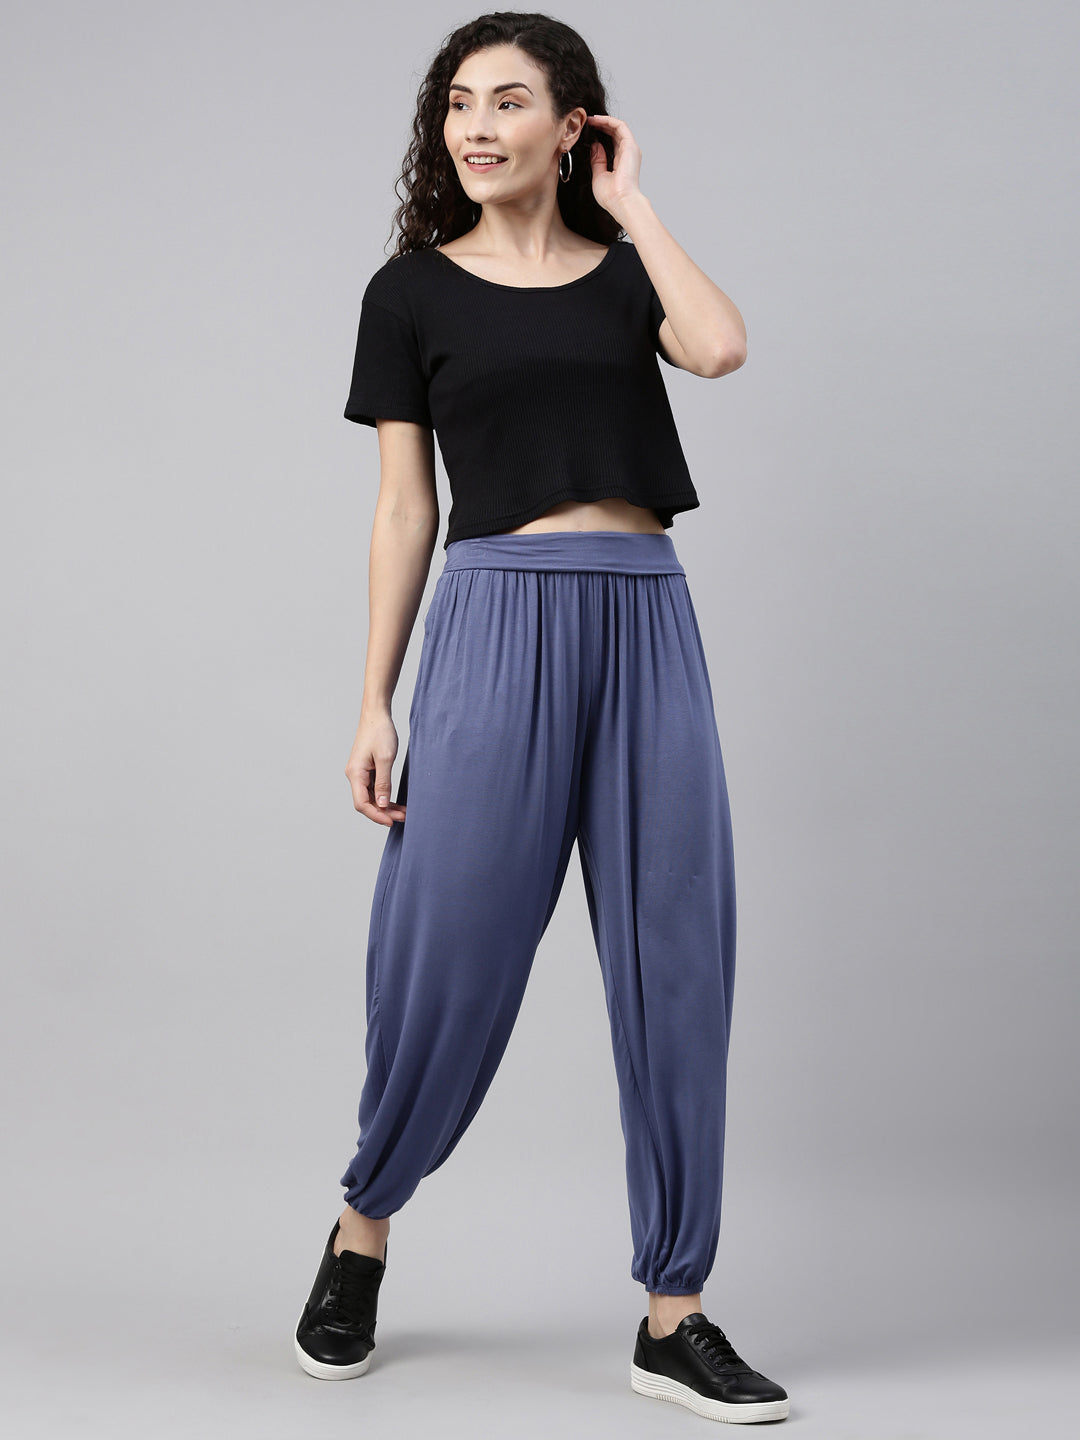 Buy online Blue Fur Track Pants from bottom wear for Women by Green Mall  for ₹499 at 17% off